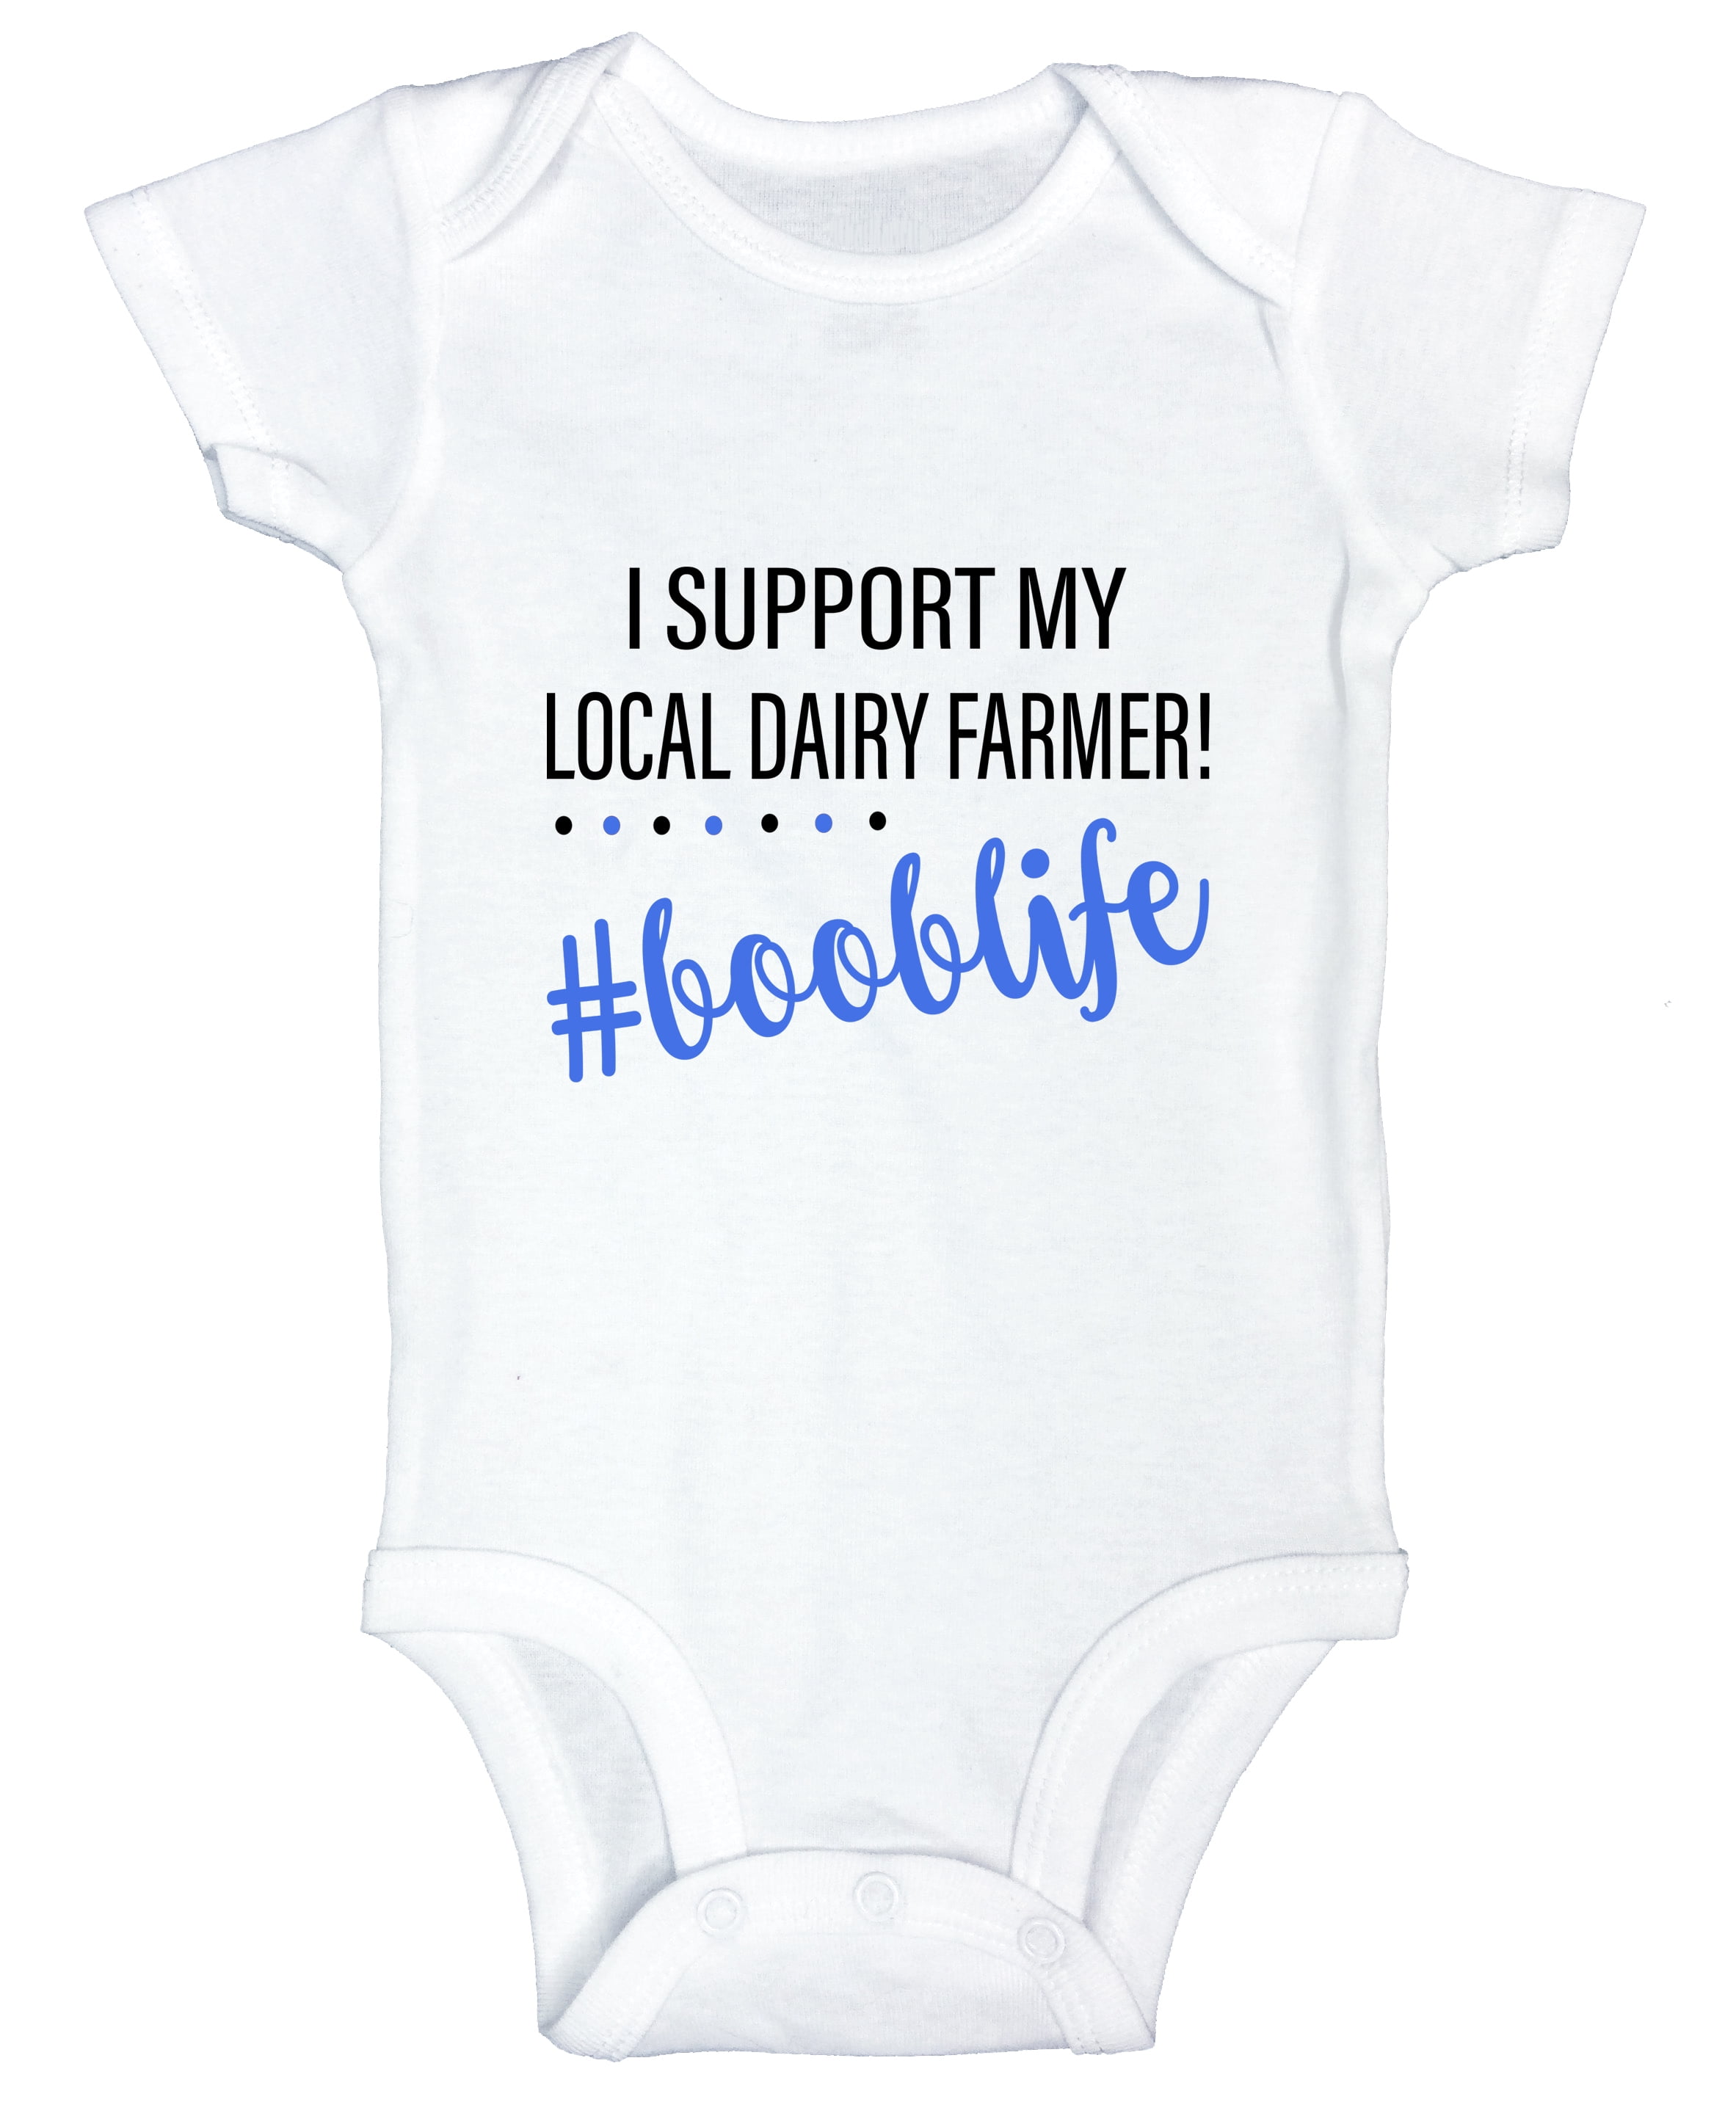 Country Onesies For Baby Cute Farm Onesies For Baby Farm Life Onesie Farm Baby Outfit For Dad